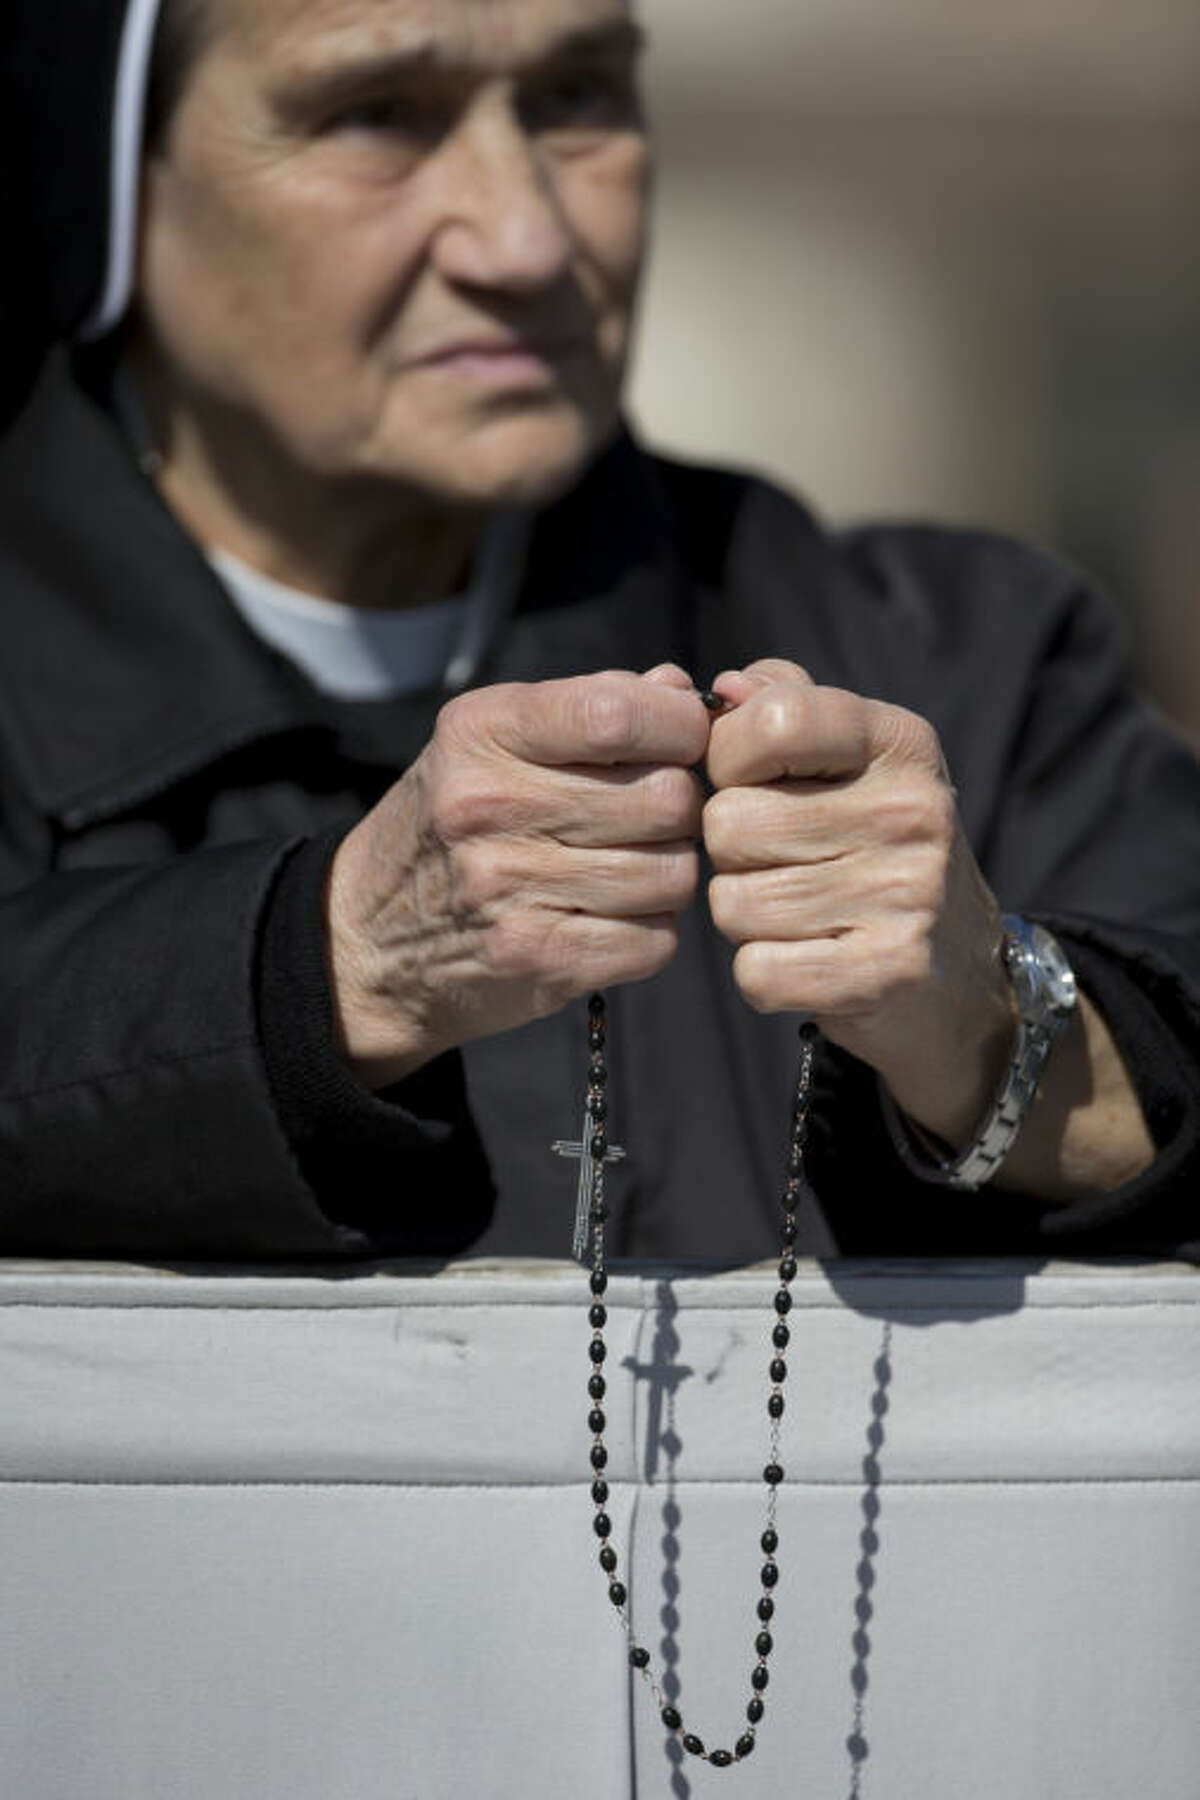 A nun holds a rosary as she prays prior to the arrival of Pope Francis to celebrate an Easter Sunday Mass in St. Peter's Square at the Vatican, Sunday, April 20, 2014. Even before Mass began, a crowd of more than 100,000 was overflowing from the cobblestoned square. Many more Romans, tourists and pilgrims were still streaming in for the pontiff's tradition Easter greeting at noon. (AP Photo/Andrew Medichini)